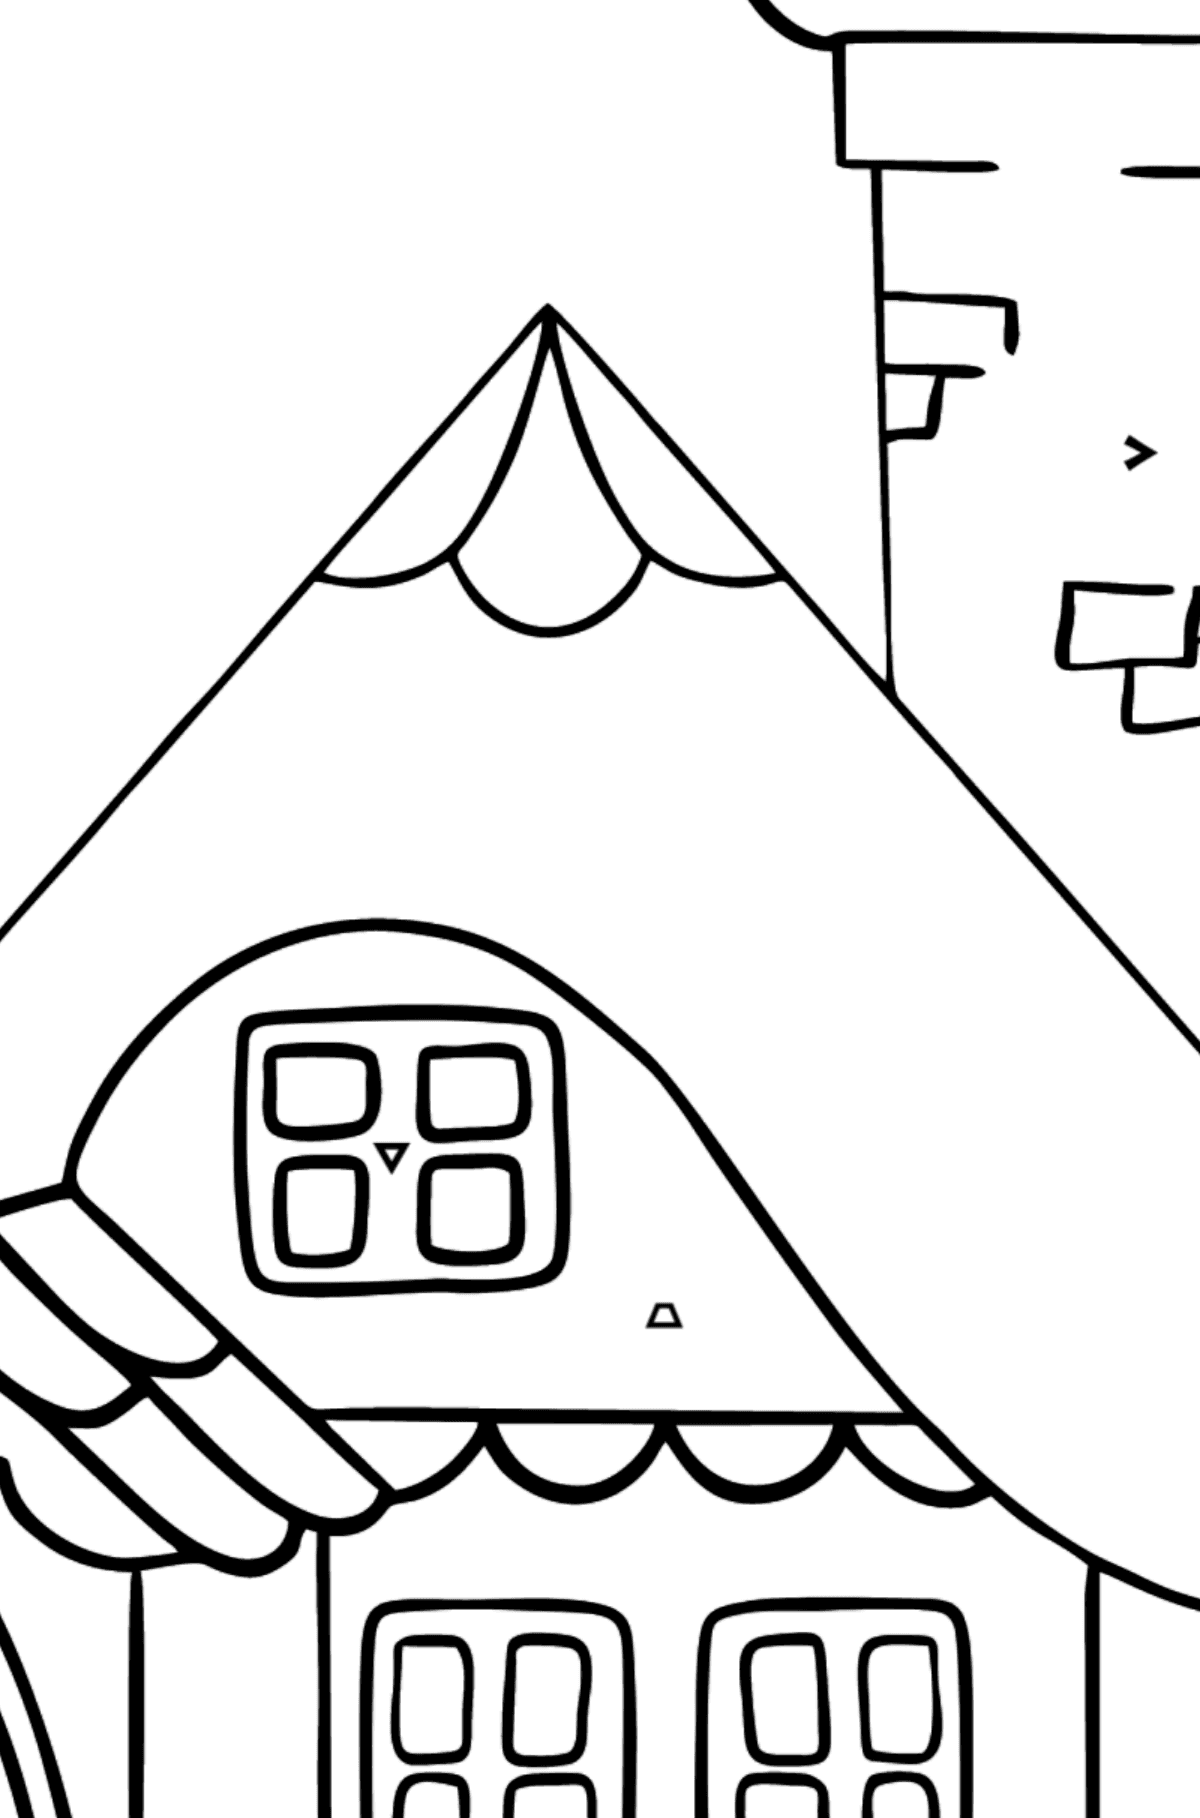 Simple Coloring Page - A Wonderful House - Coloring by Symbols and Geometric Shapes for Kids